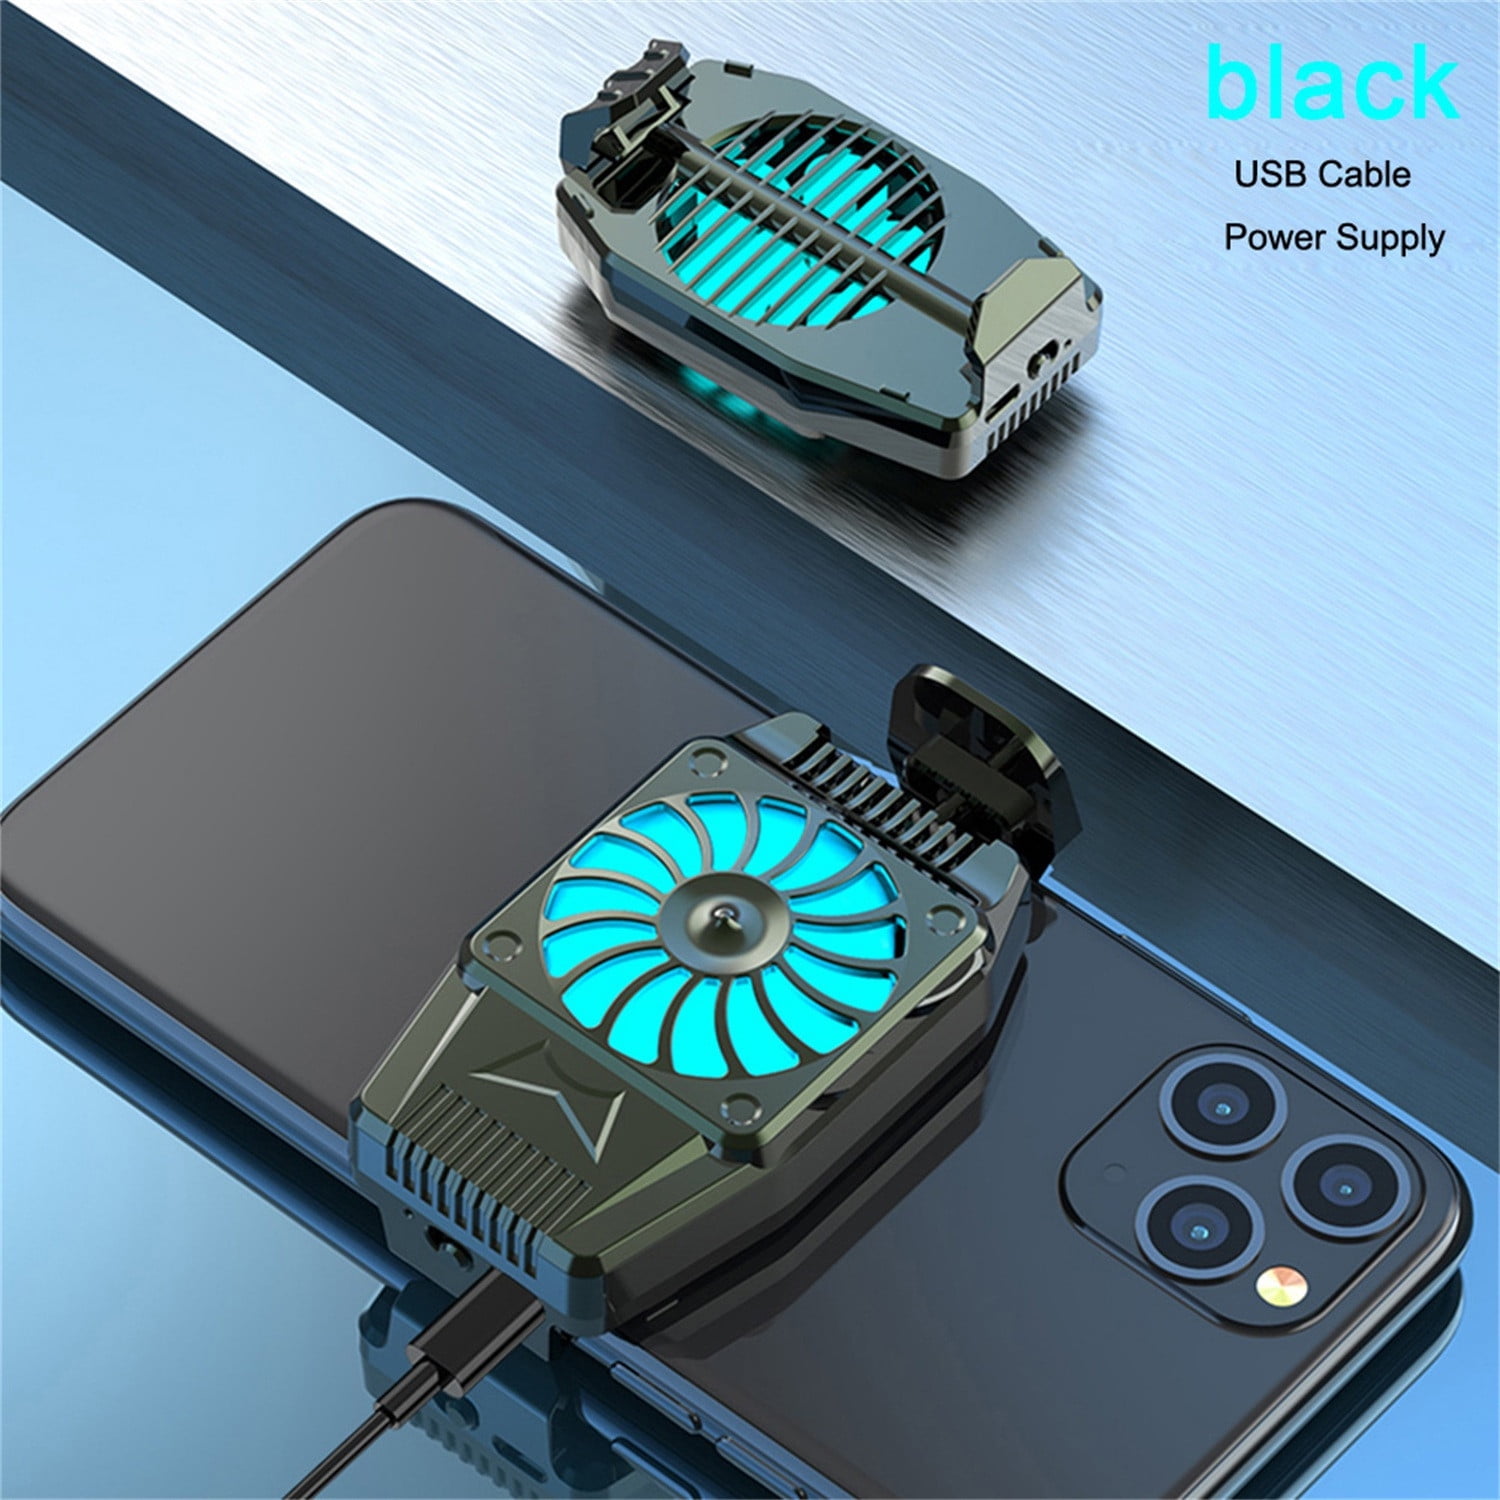 STEADY Universal Mini Mobile Phone Fan Radiator Turbo Game Cooler Cell Phone Cool Heat Sink For IPhone/For Samsung black - Walmart.com